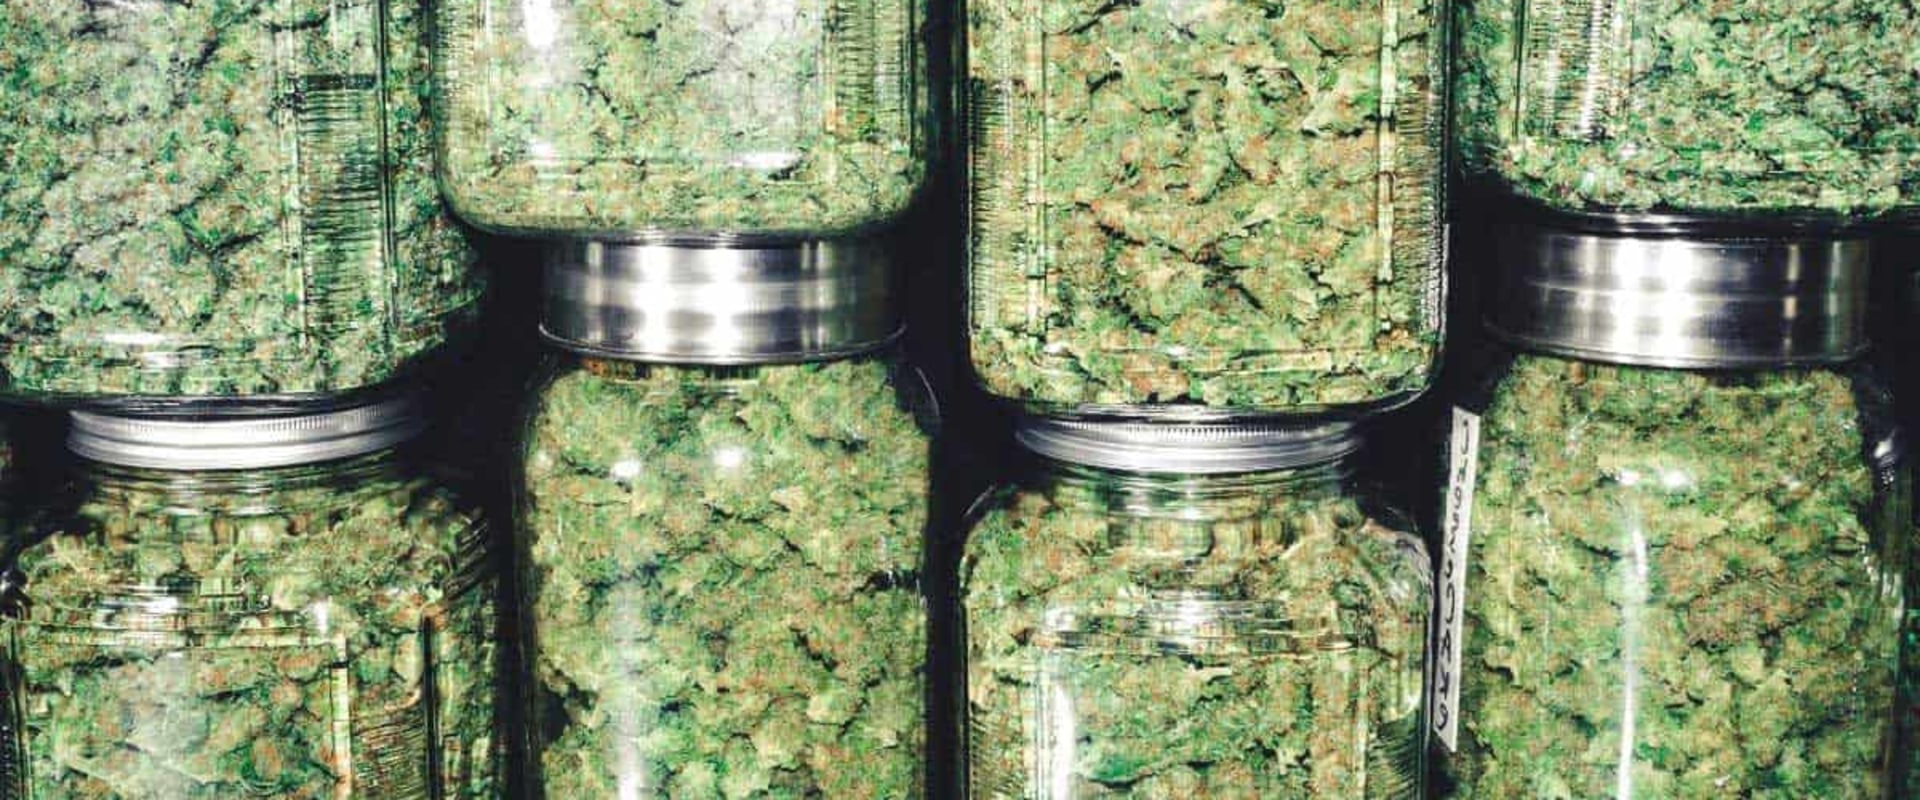 How much does a colorado dispensary make a year?